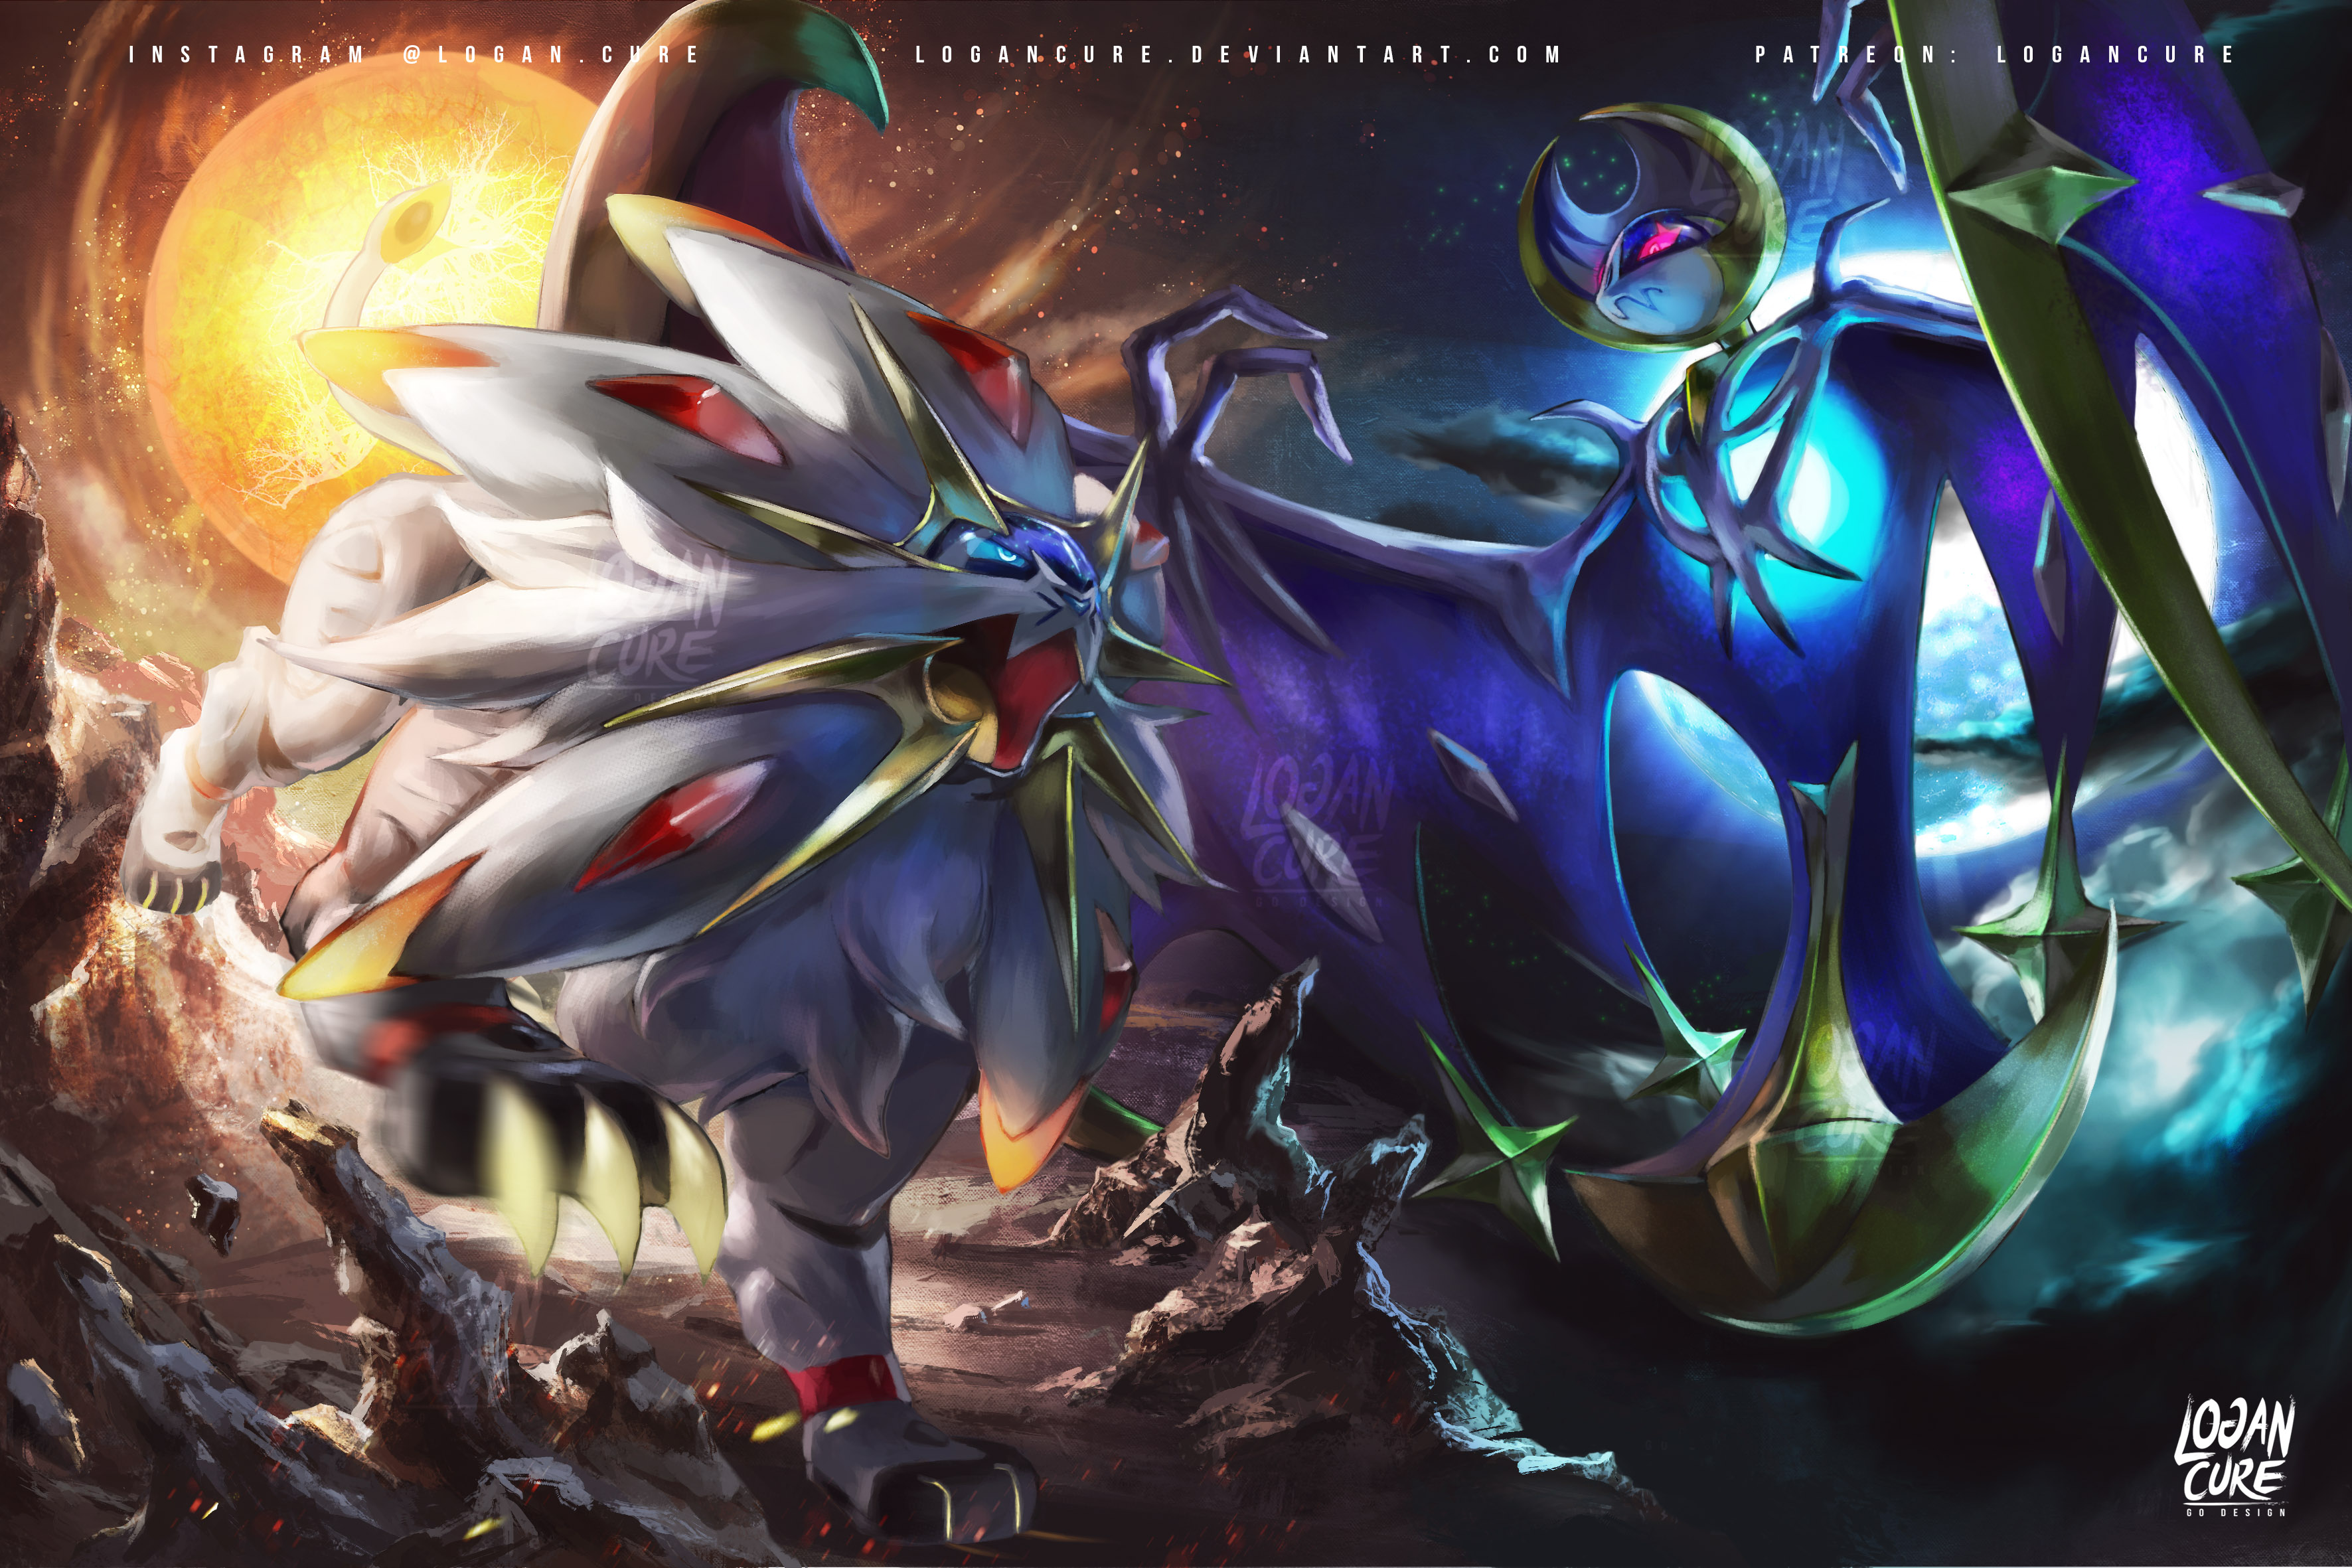 Pokémon: Sun and Moon Picture by Logan cure